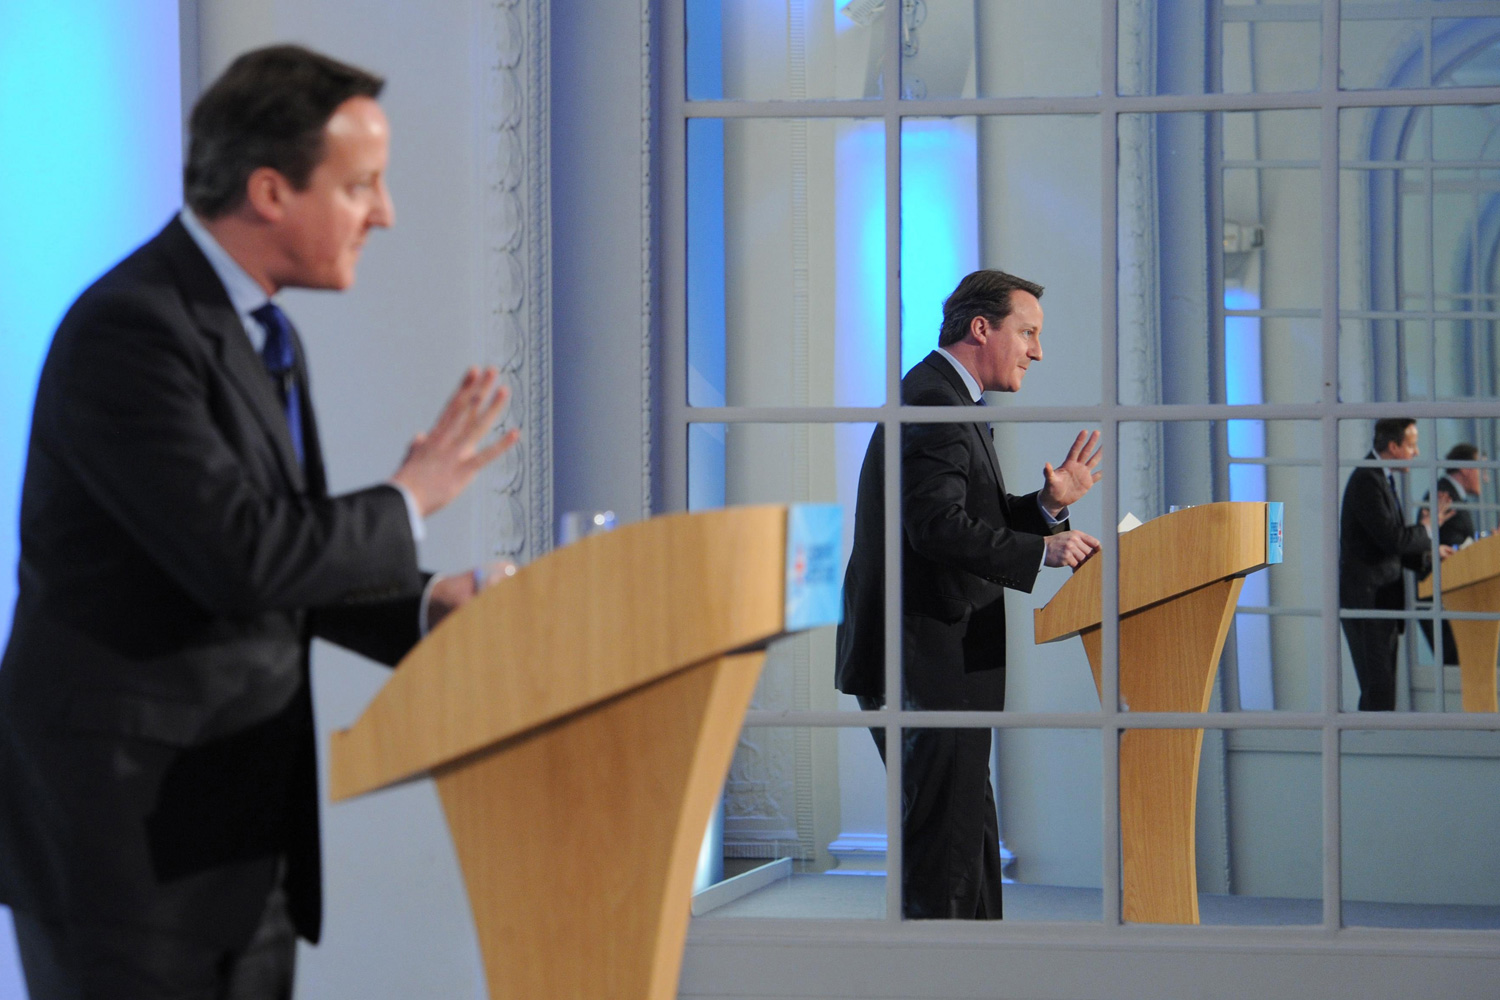 March 3, 2012. Prime Minister David Cameron addresses the Conservative Party Spring Forum in London.